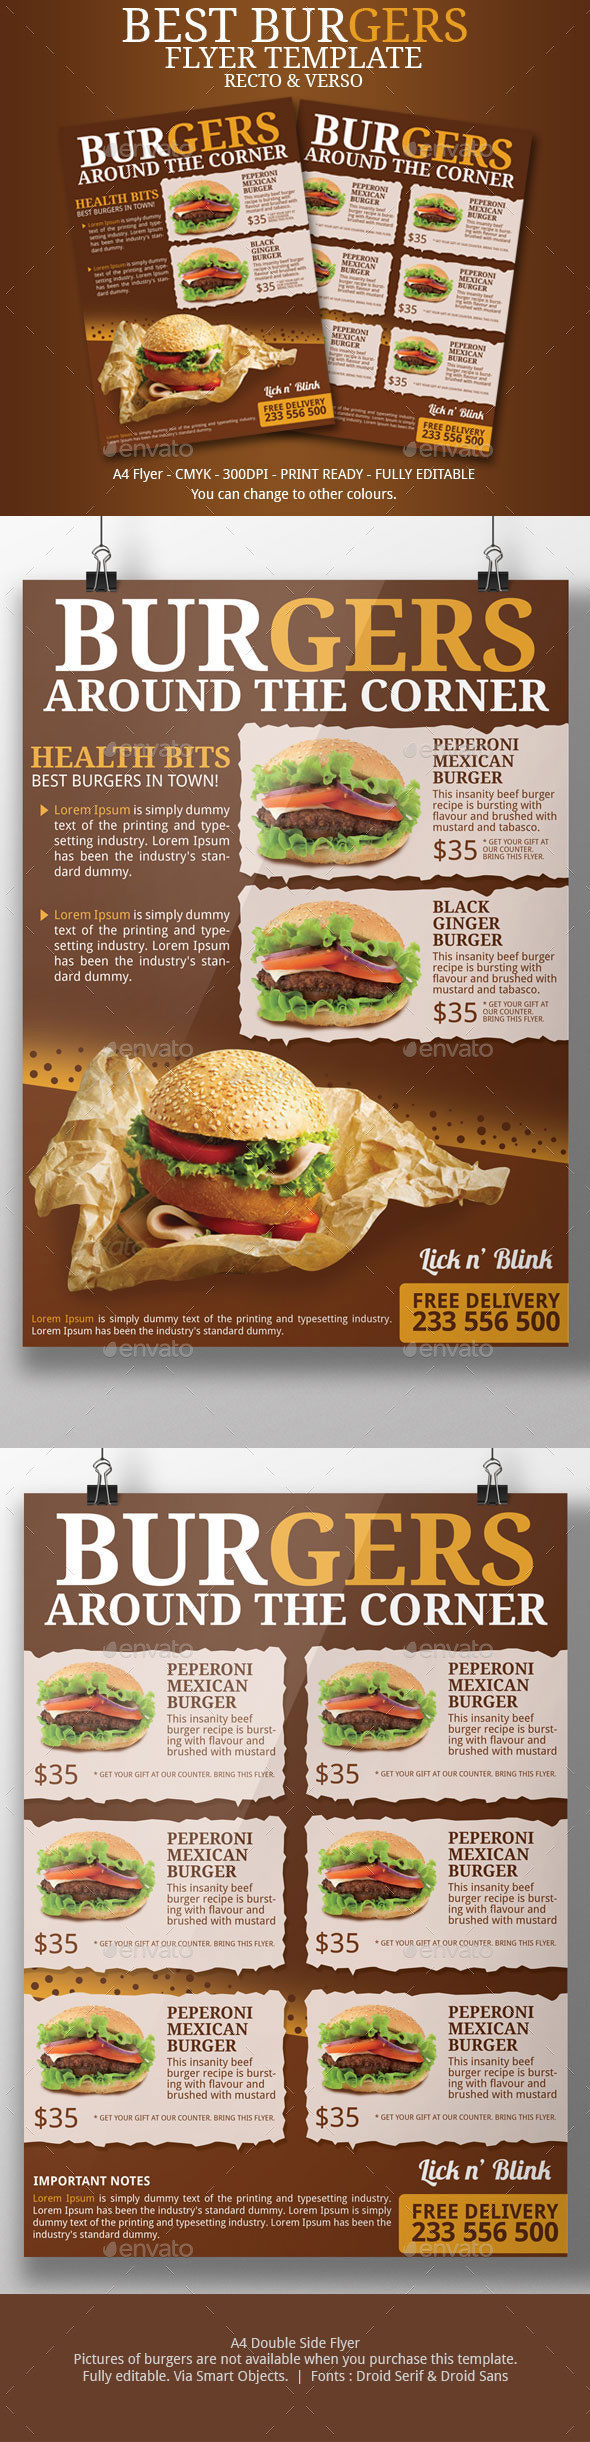 Graphicriver 10755958 best burger flyer update 755713 inline image preview source